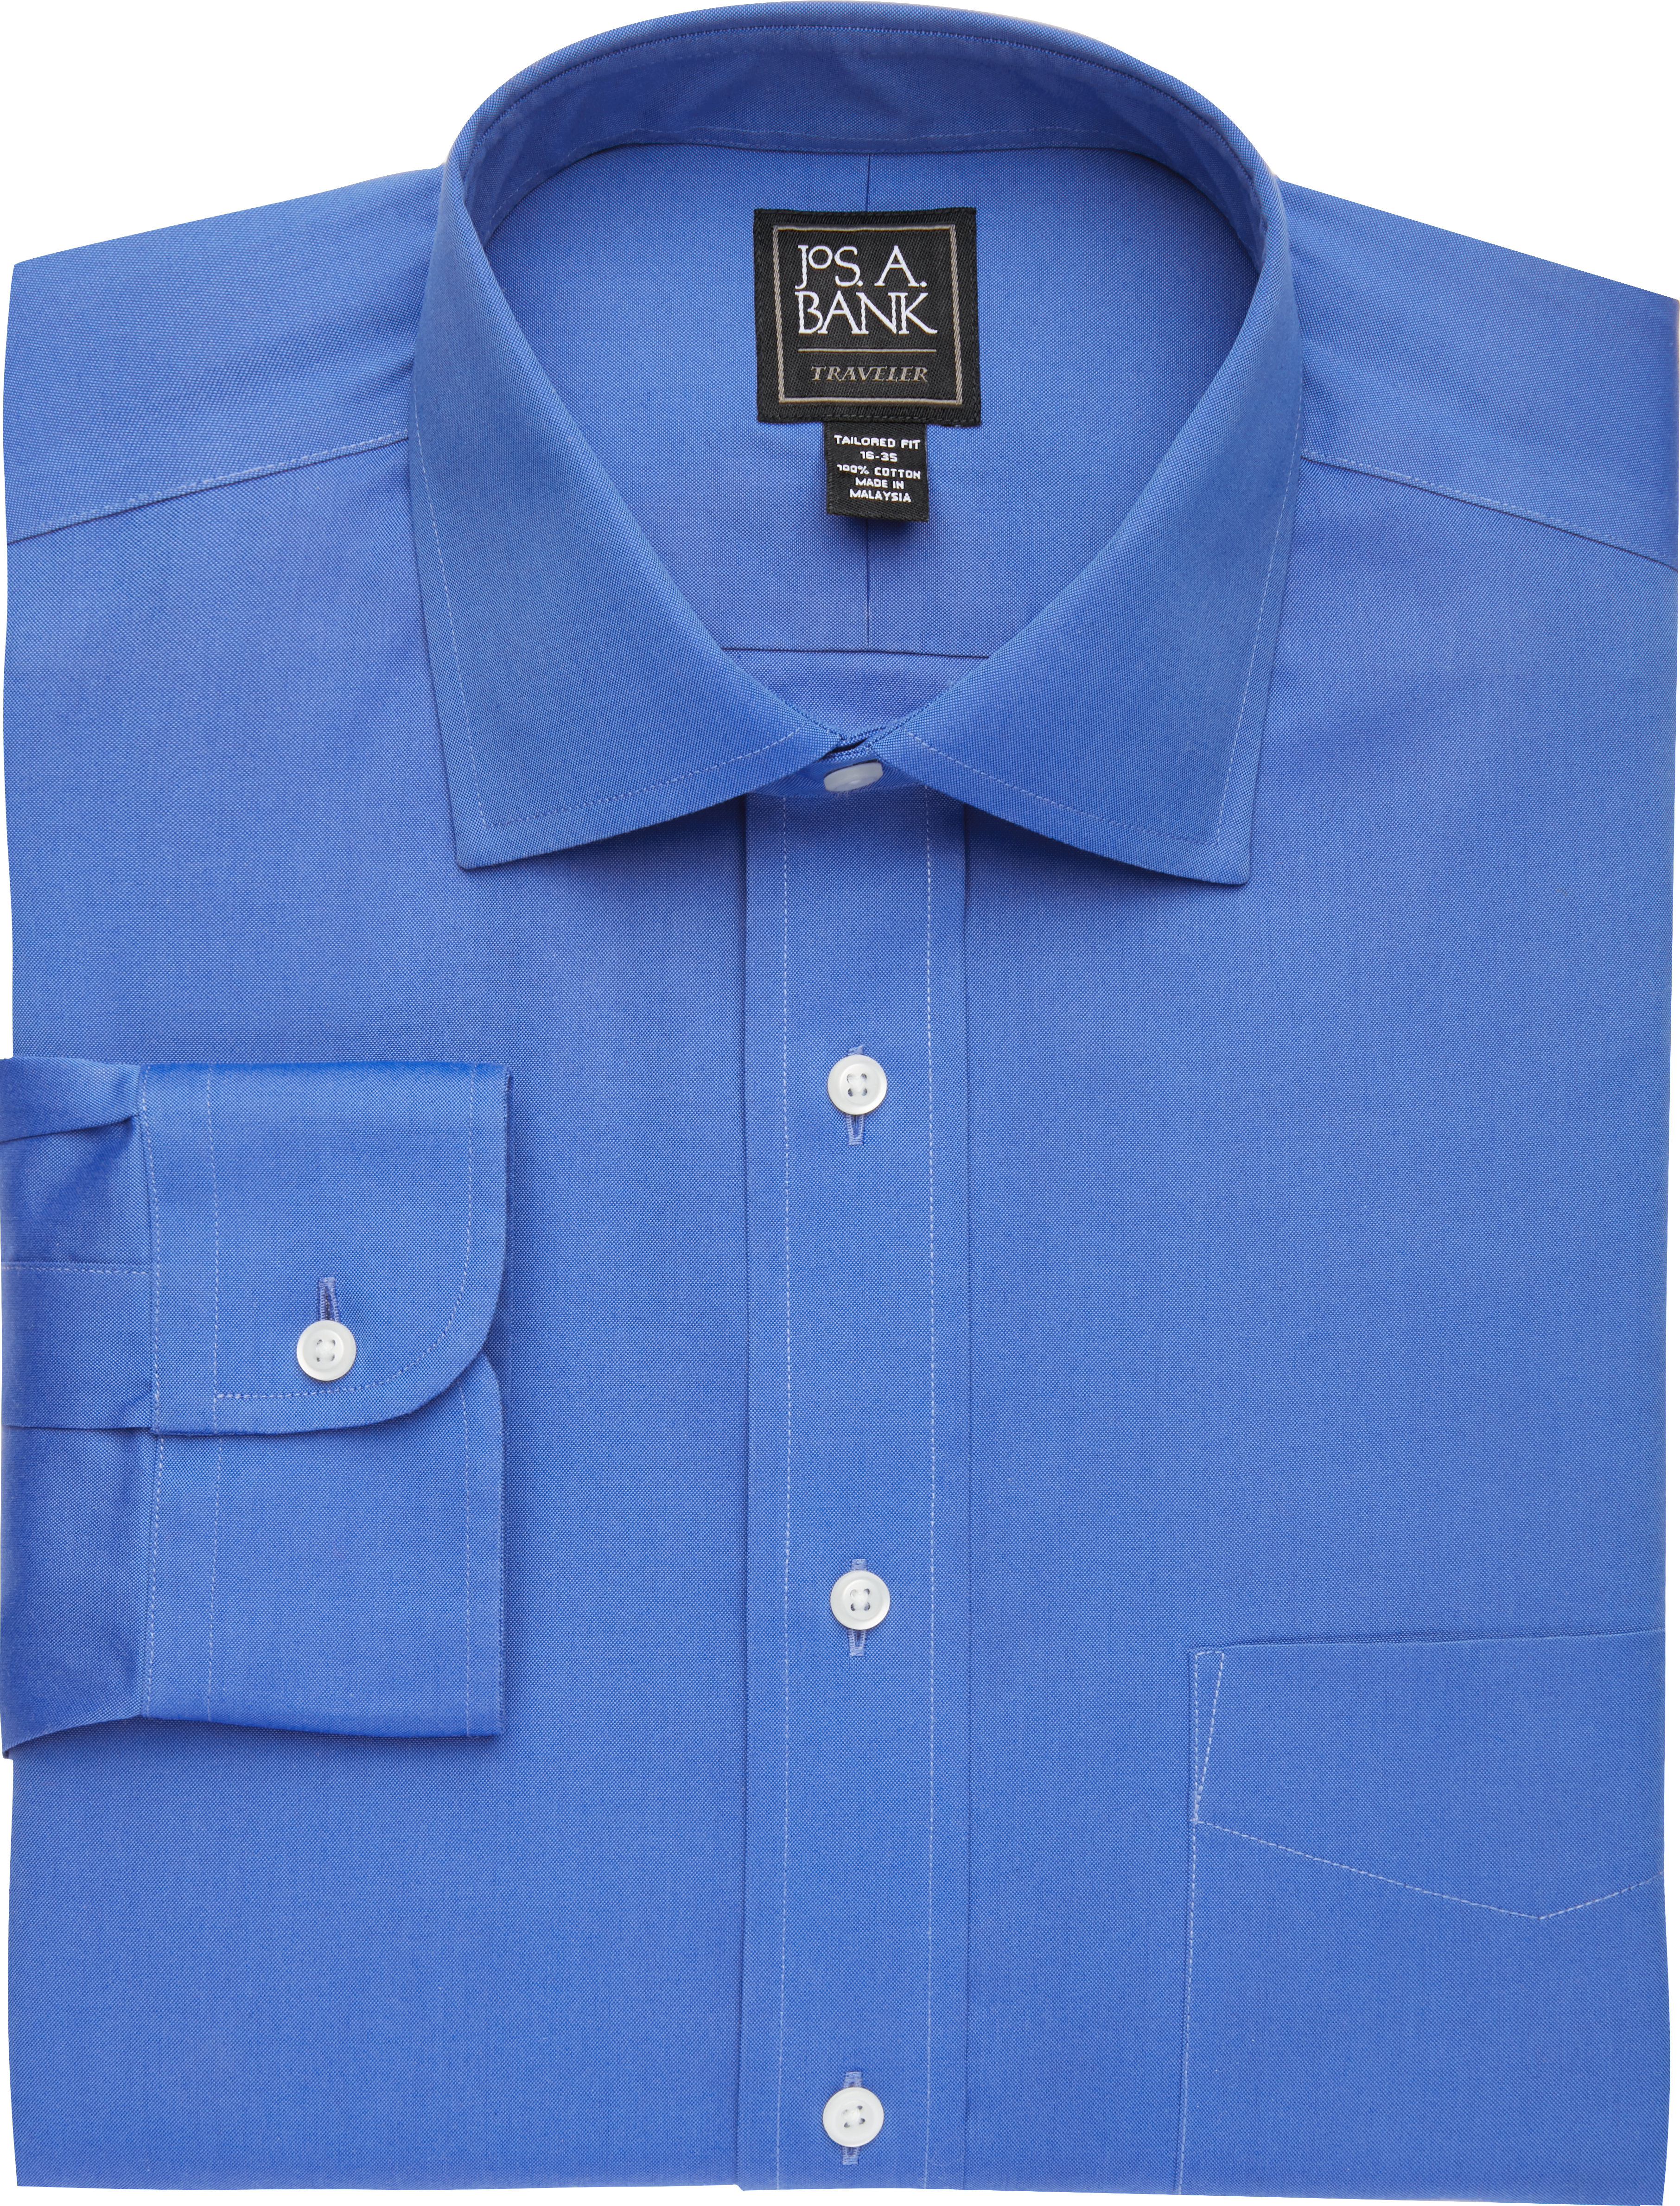 Traveler Collection Tailored Fit Spread Collar Dress Shirt - Big & Tall ...